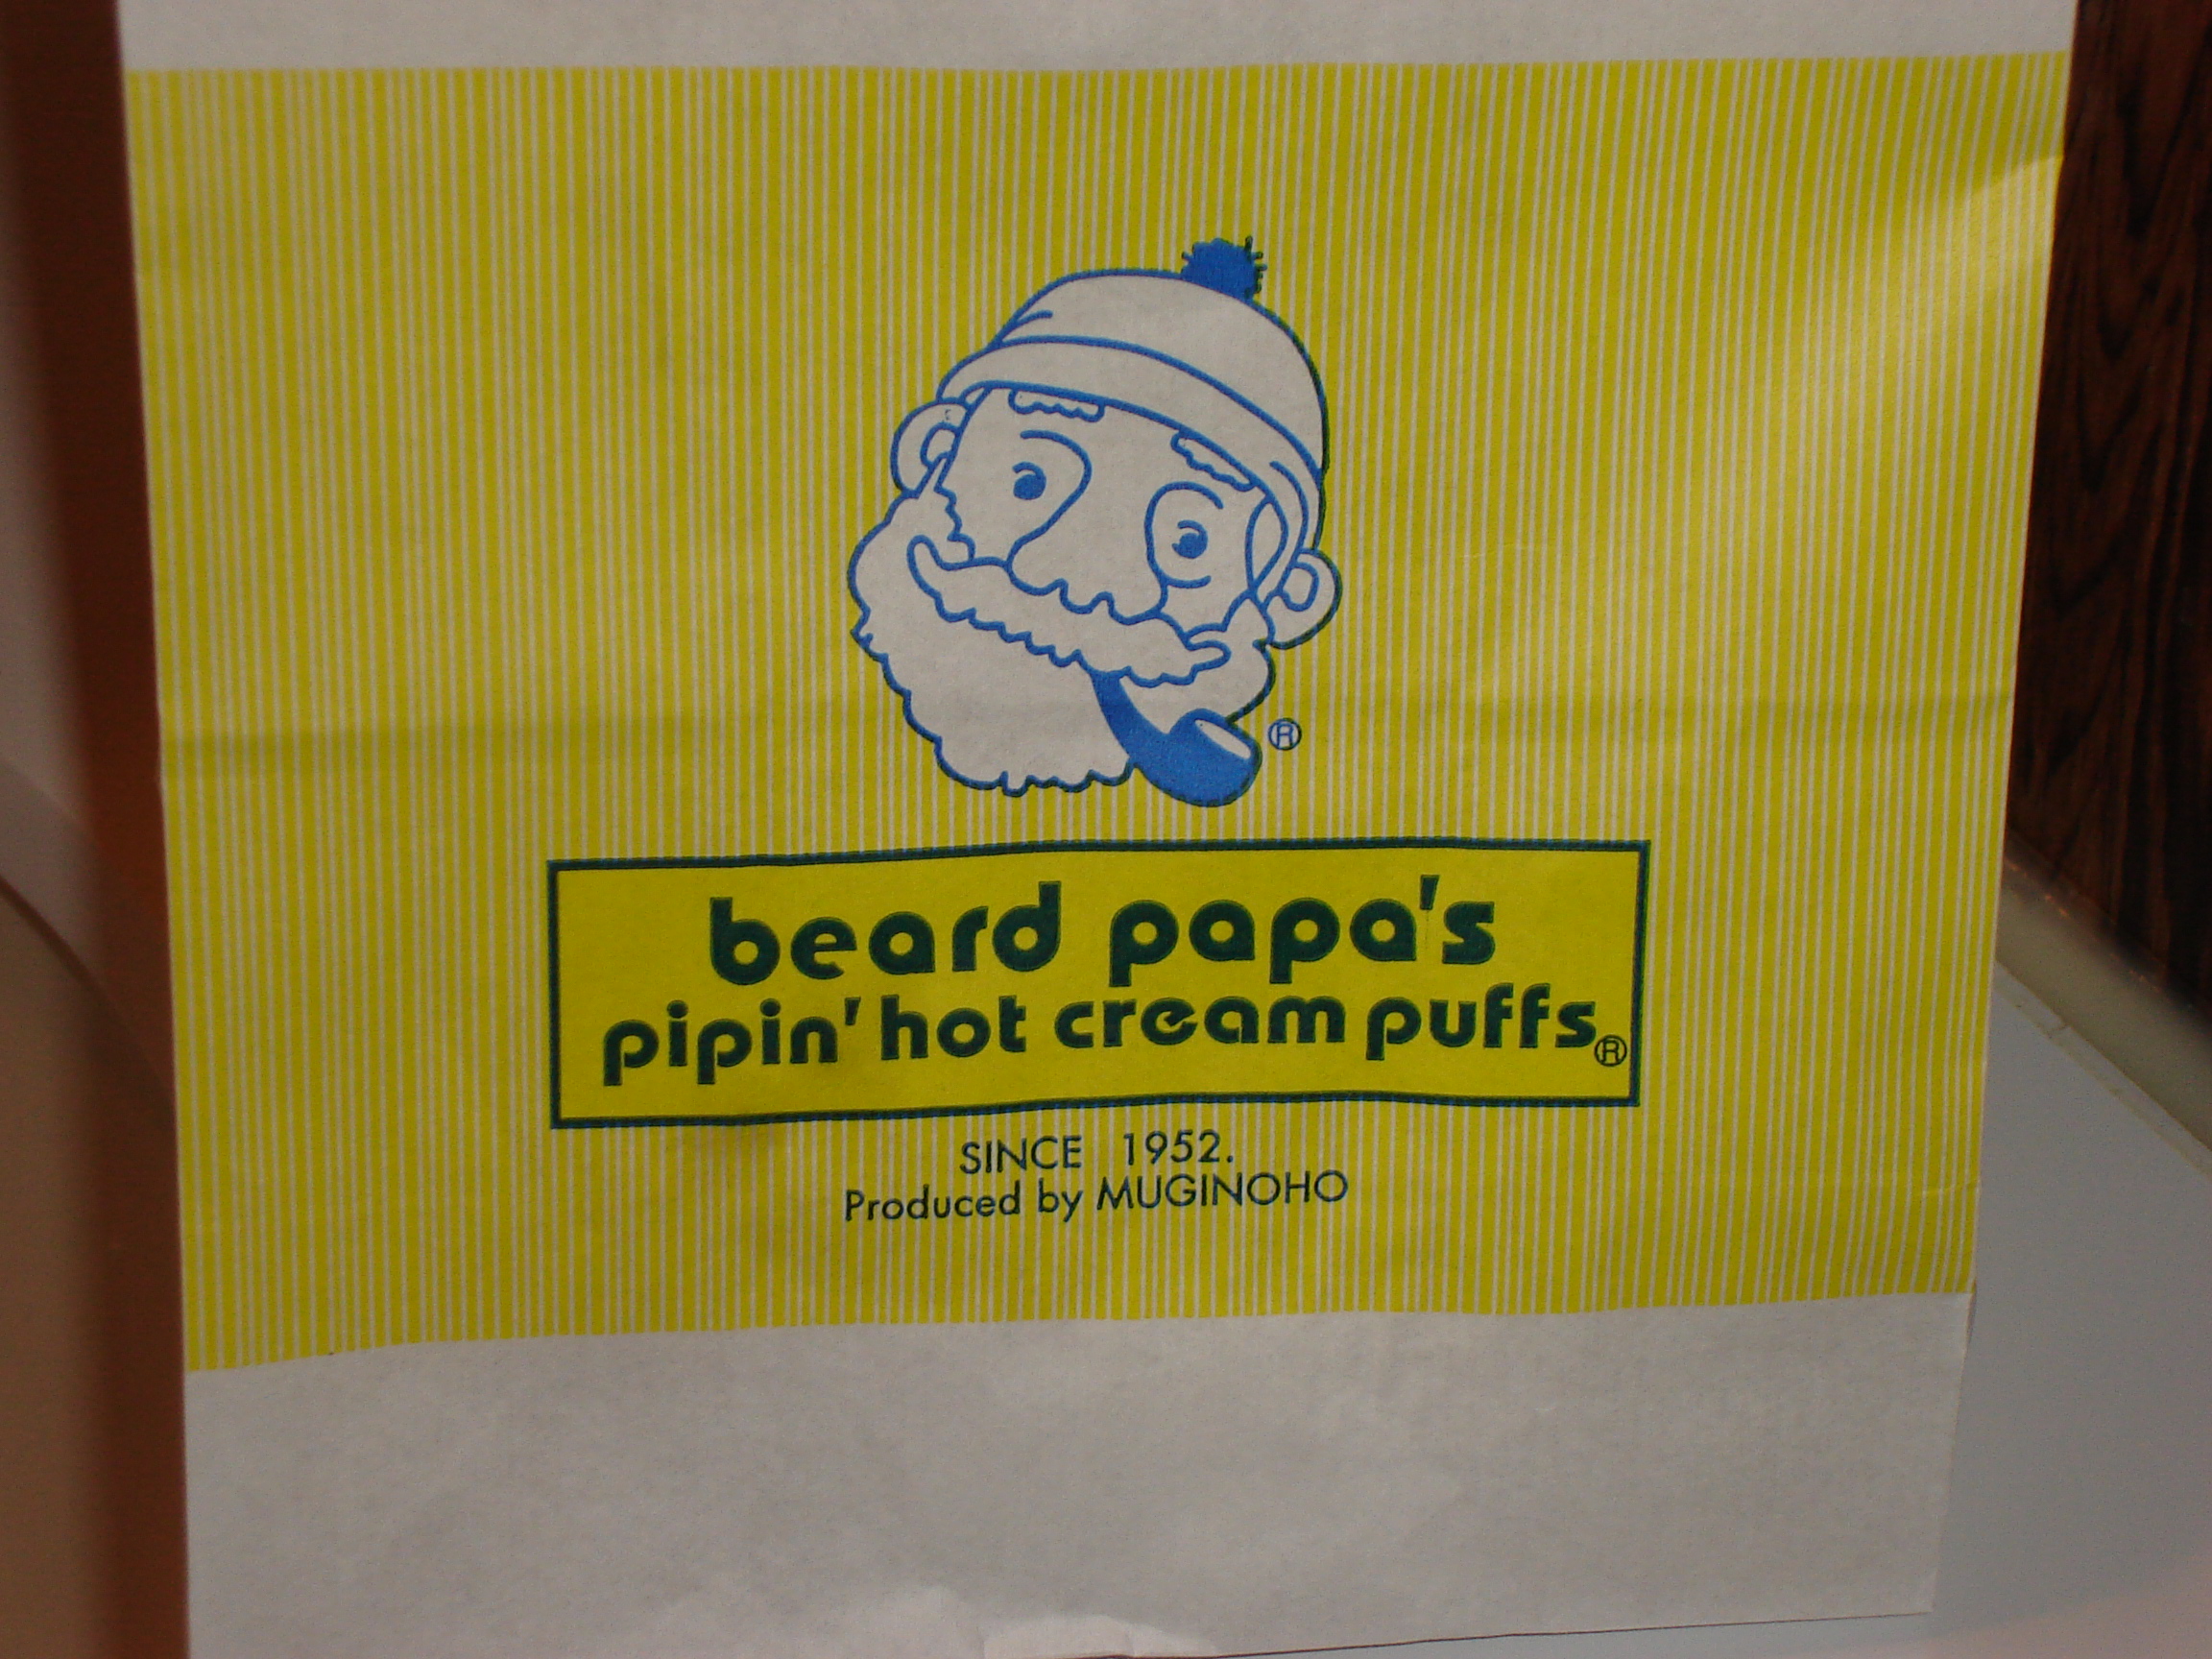 a paper bag from beard papa's pipin' hot cream puffs featurs an illustrated bearded man with a pipe